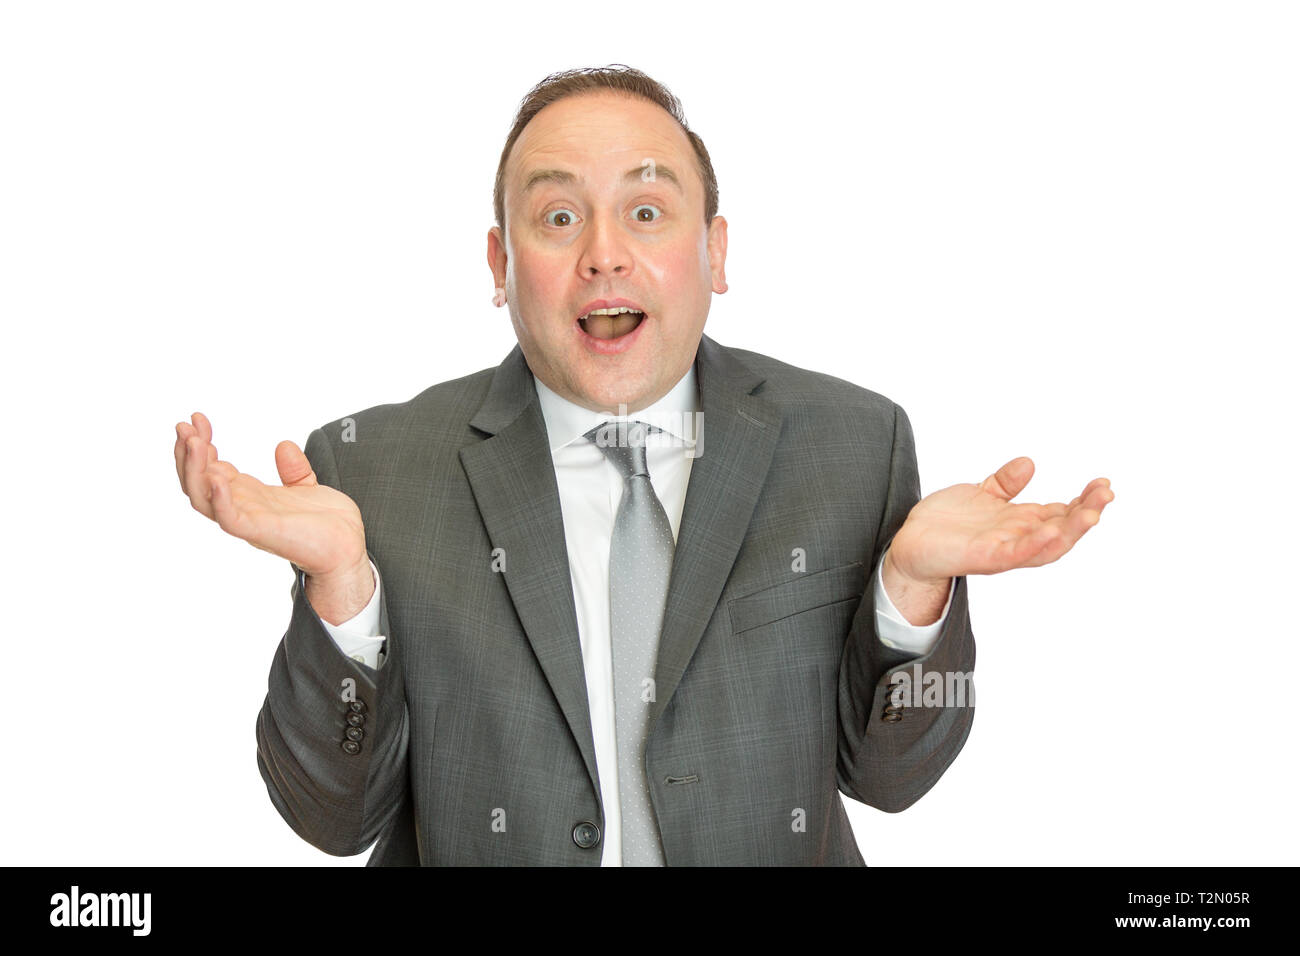 A portrait of a funny, comical business man in suit shrugging with a white background and copy space. Stock Photo